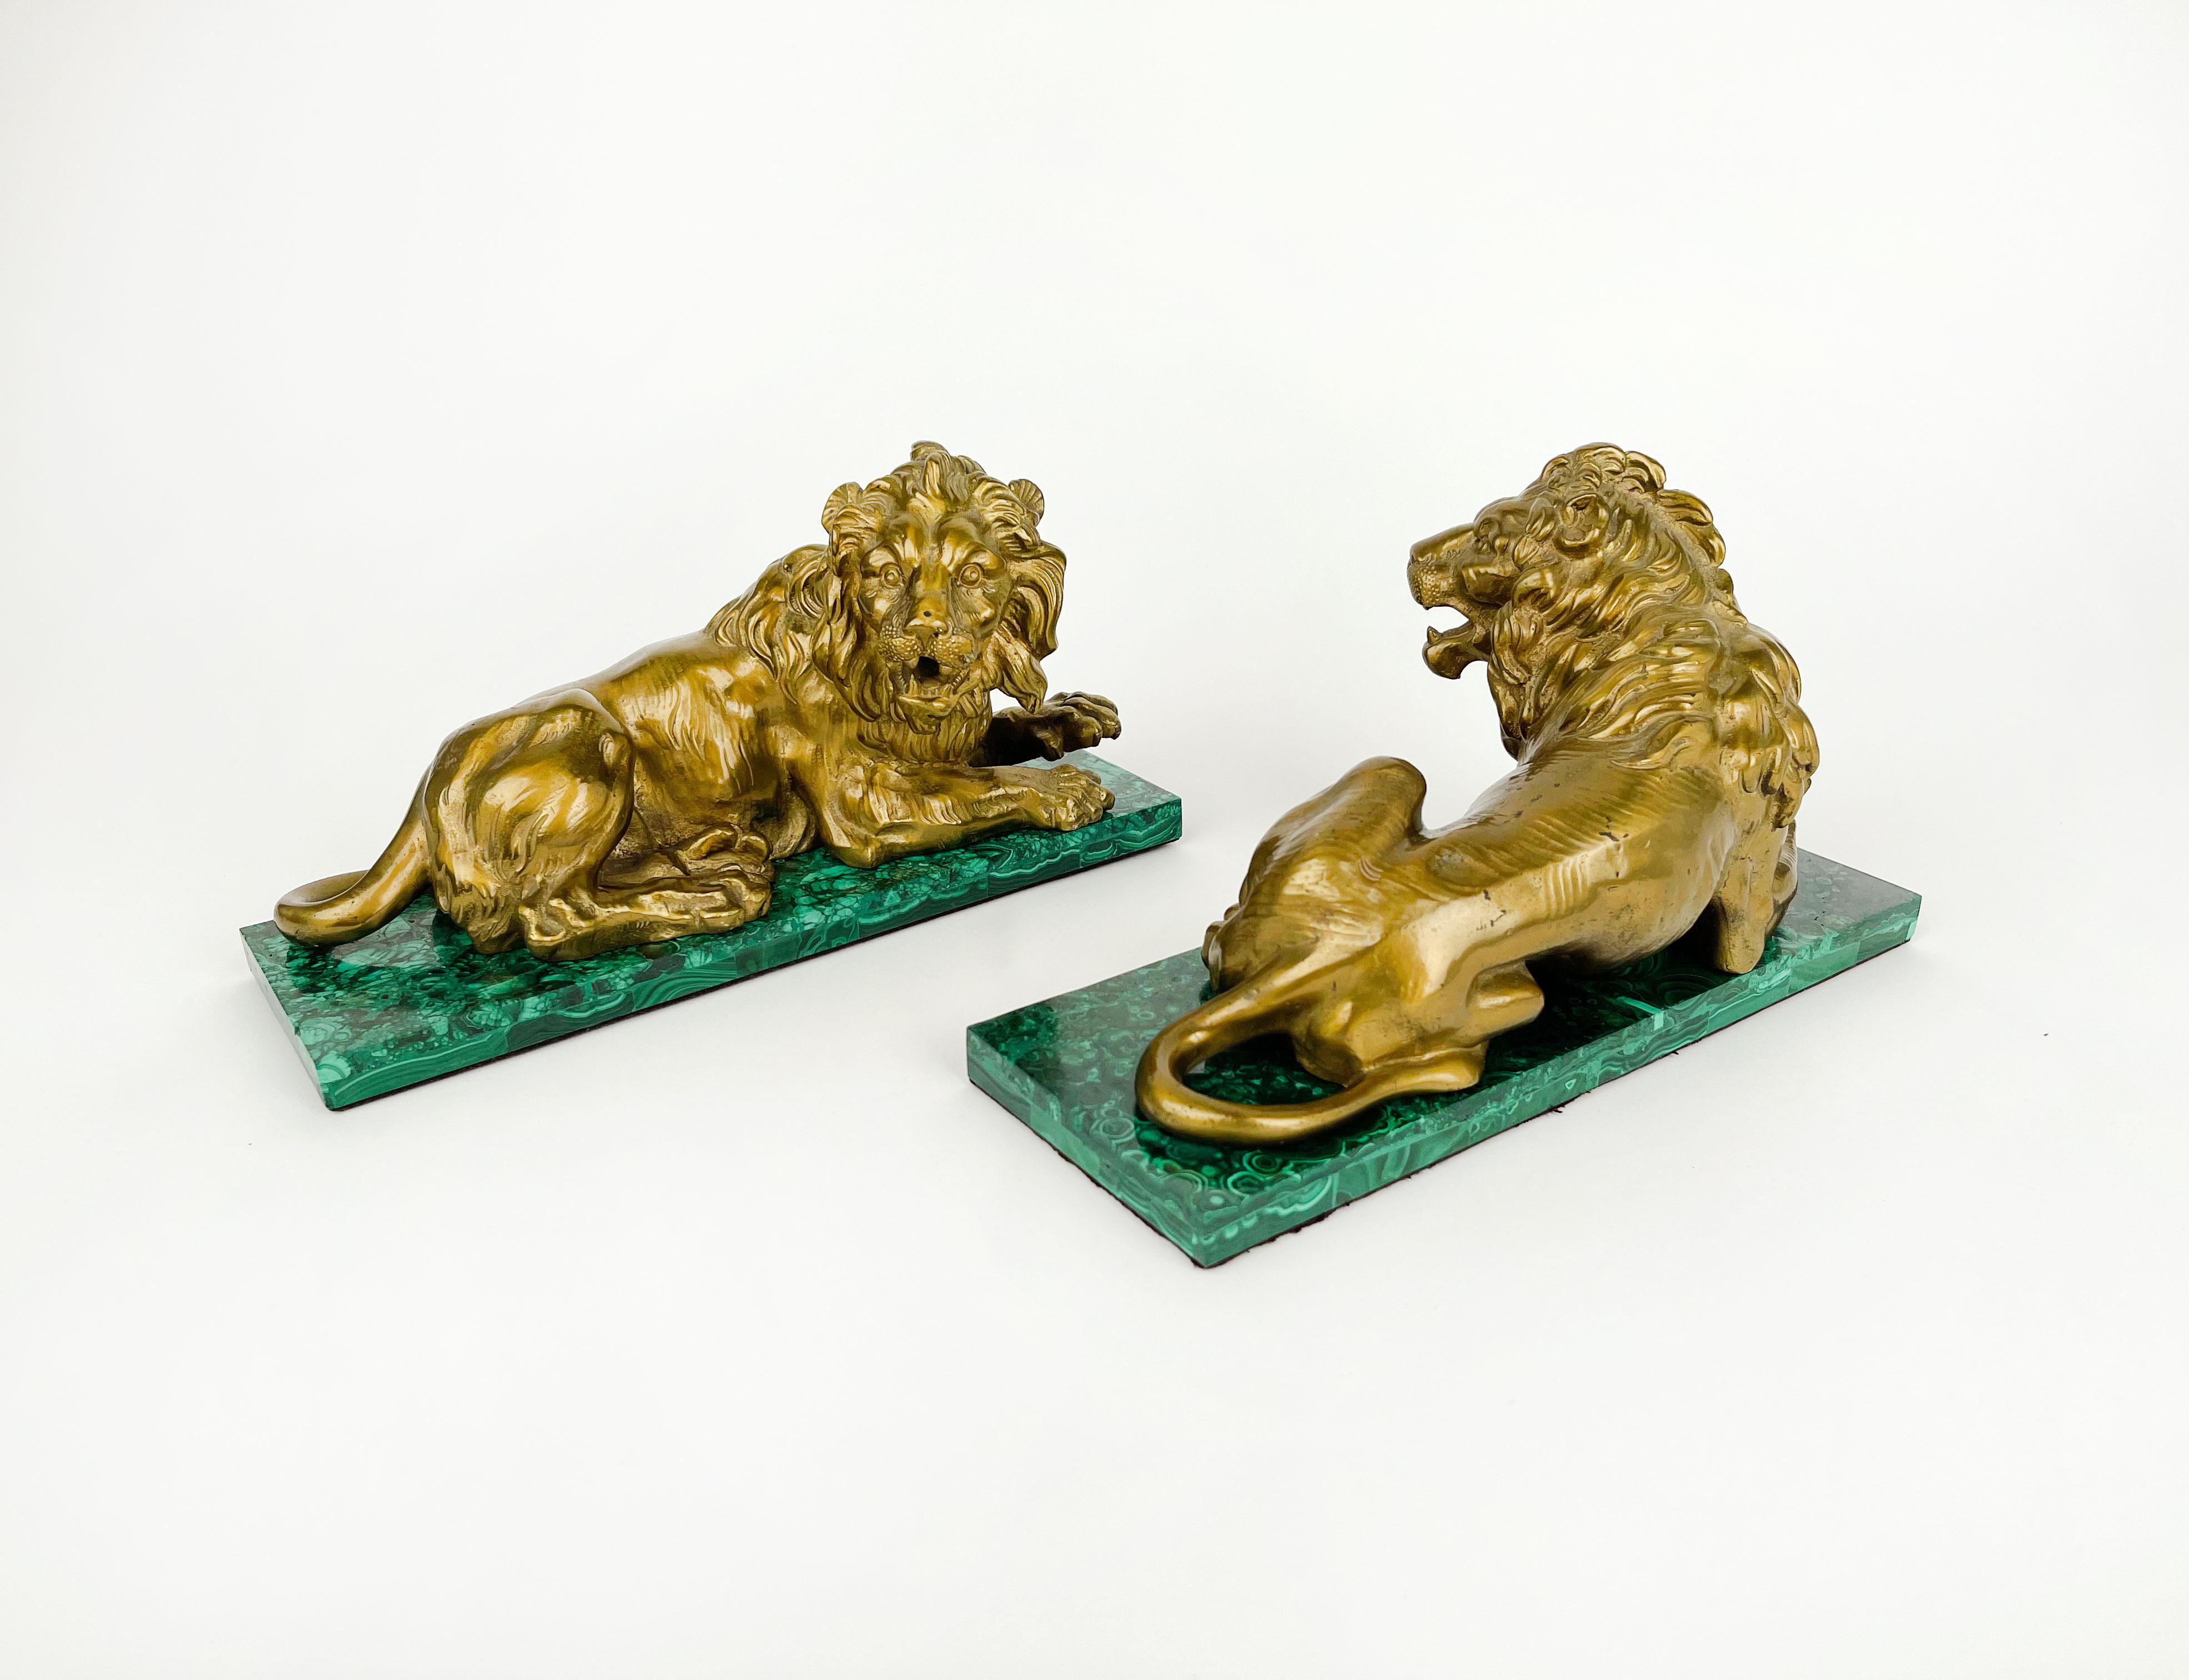 French Pair of Gilt Bronze &Malachite Figures of Lions, France, circa 1850 For Sale